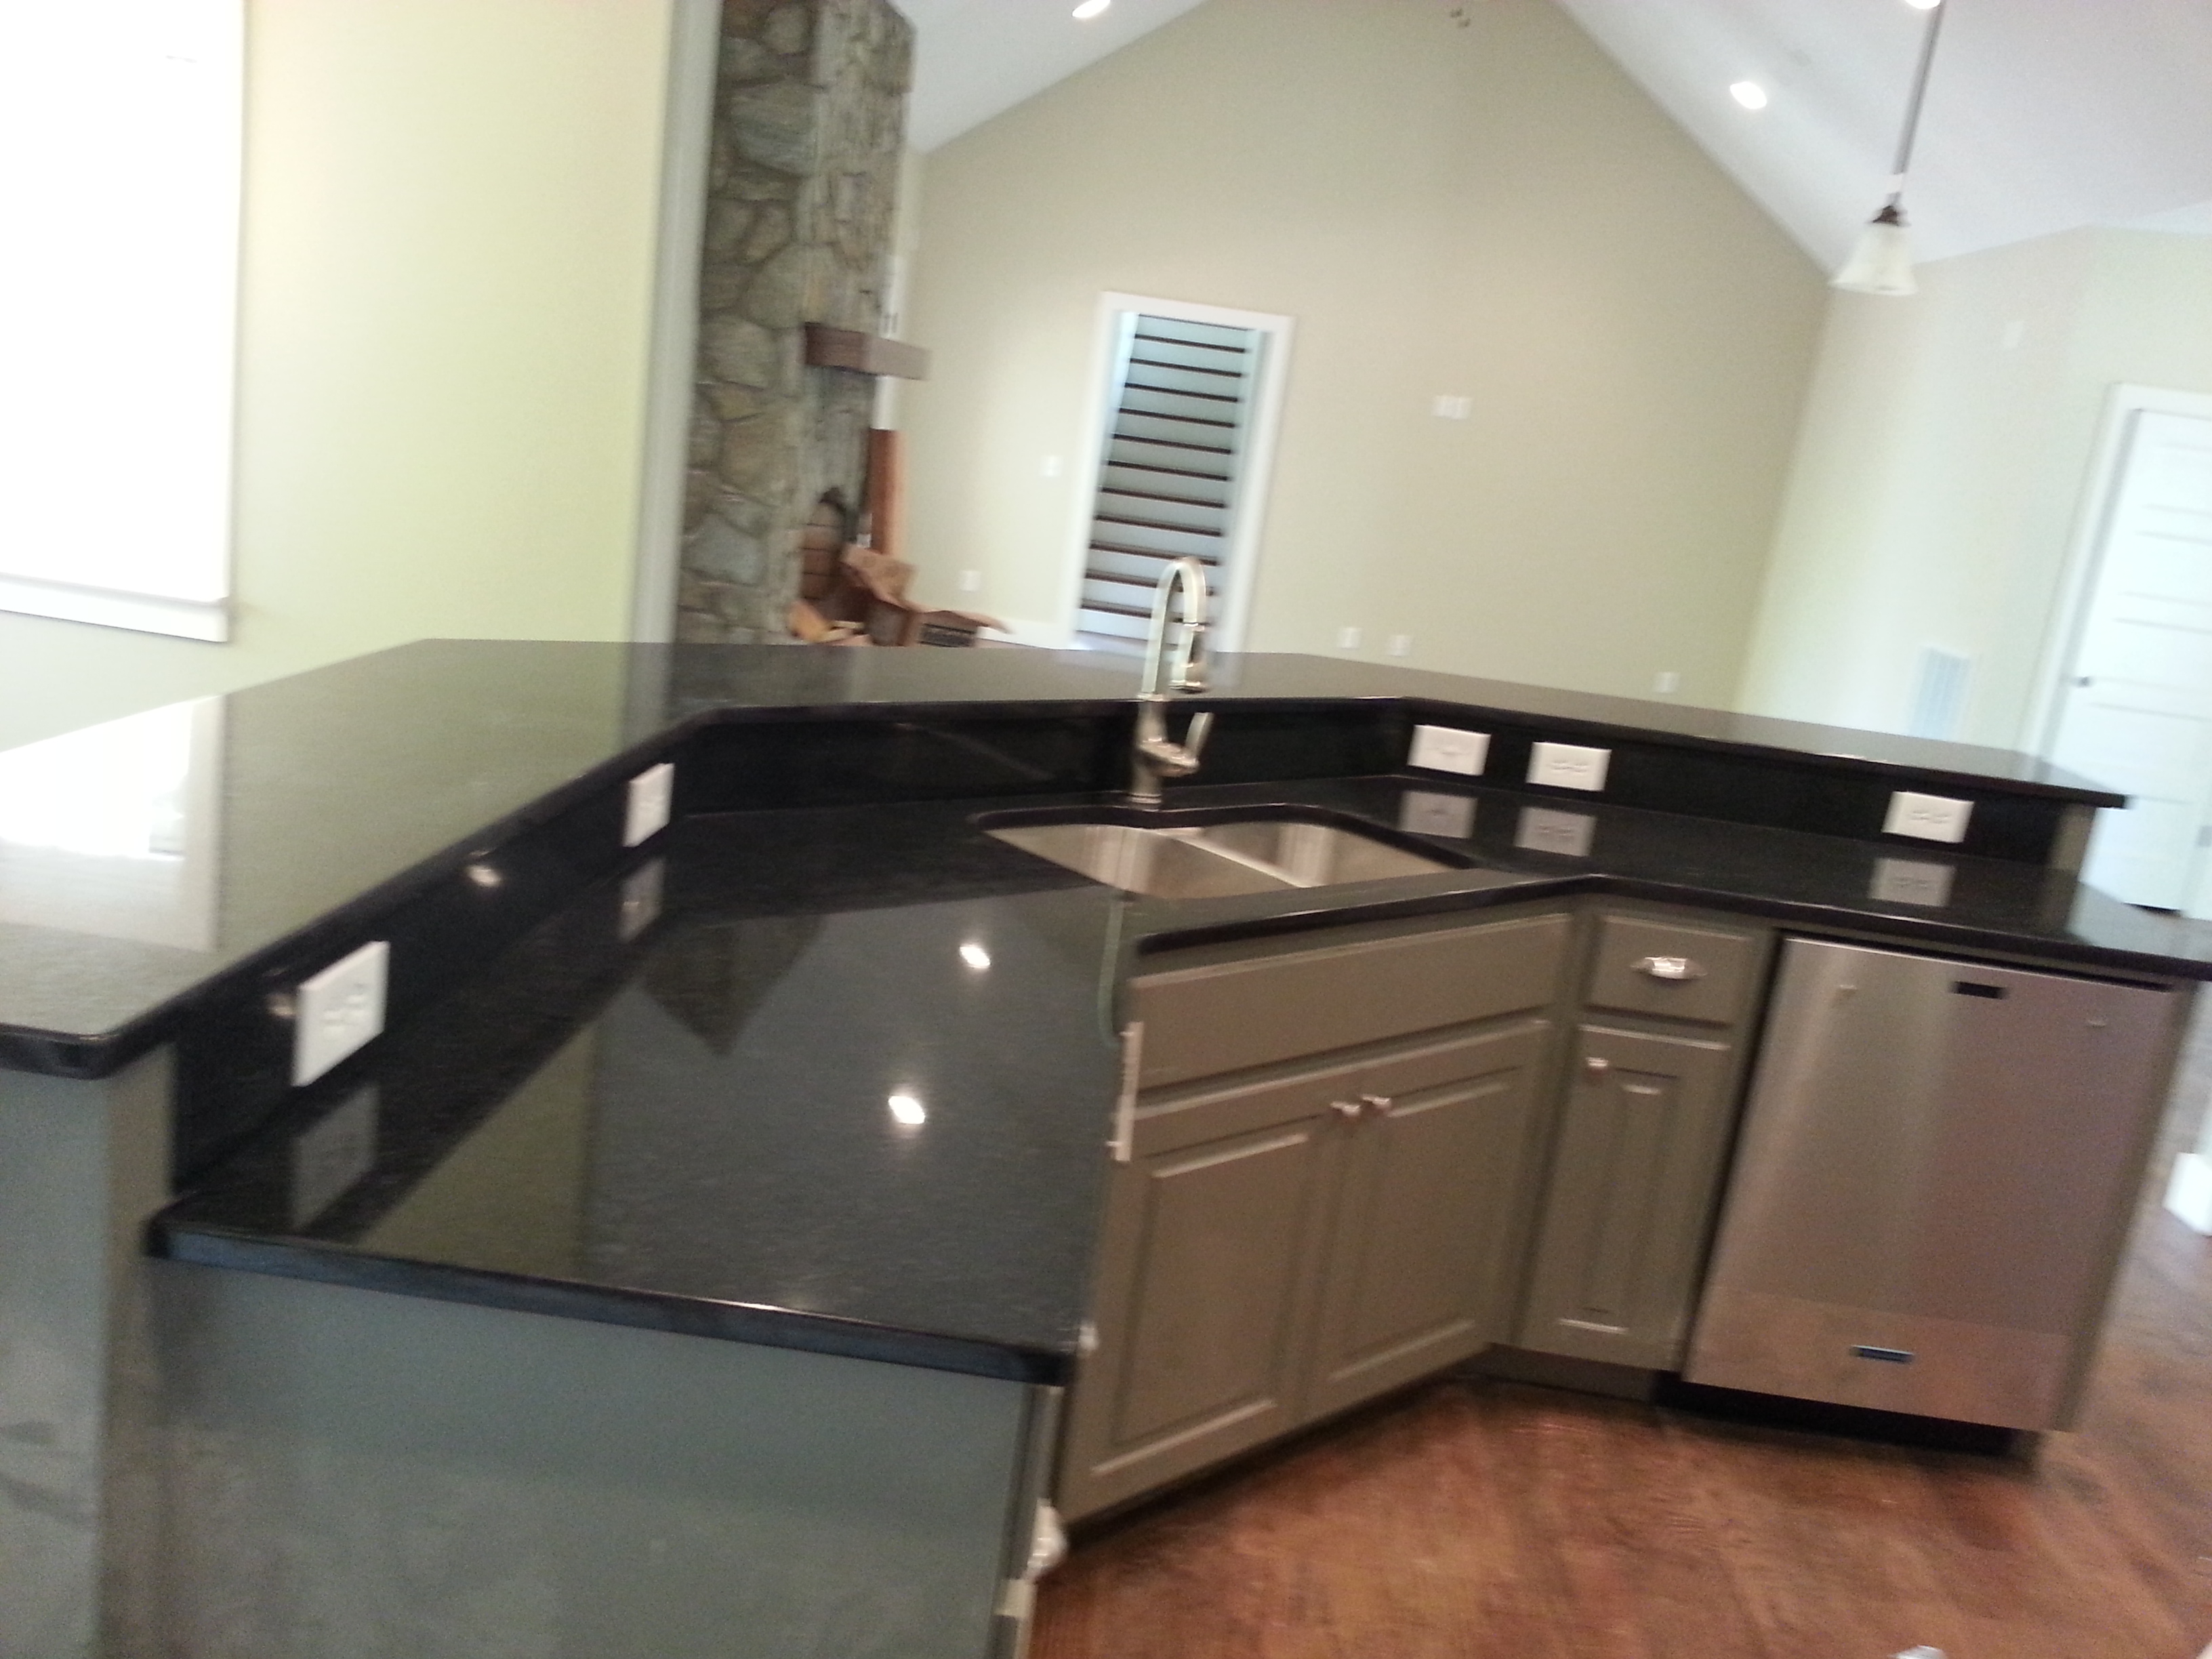 Blue Coral Stoneworks Granite, Marble and Quartz Counters for Kitchens Greenville, SC